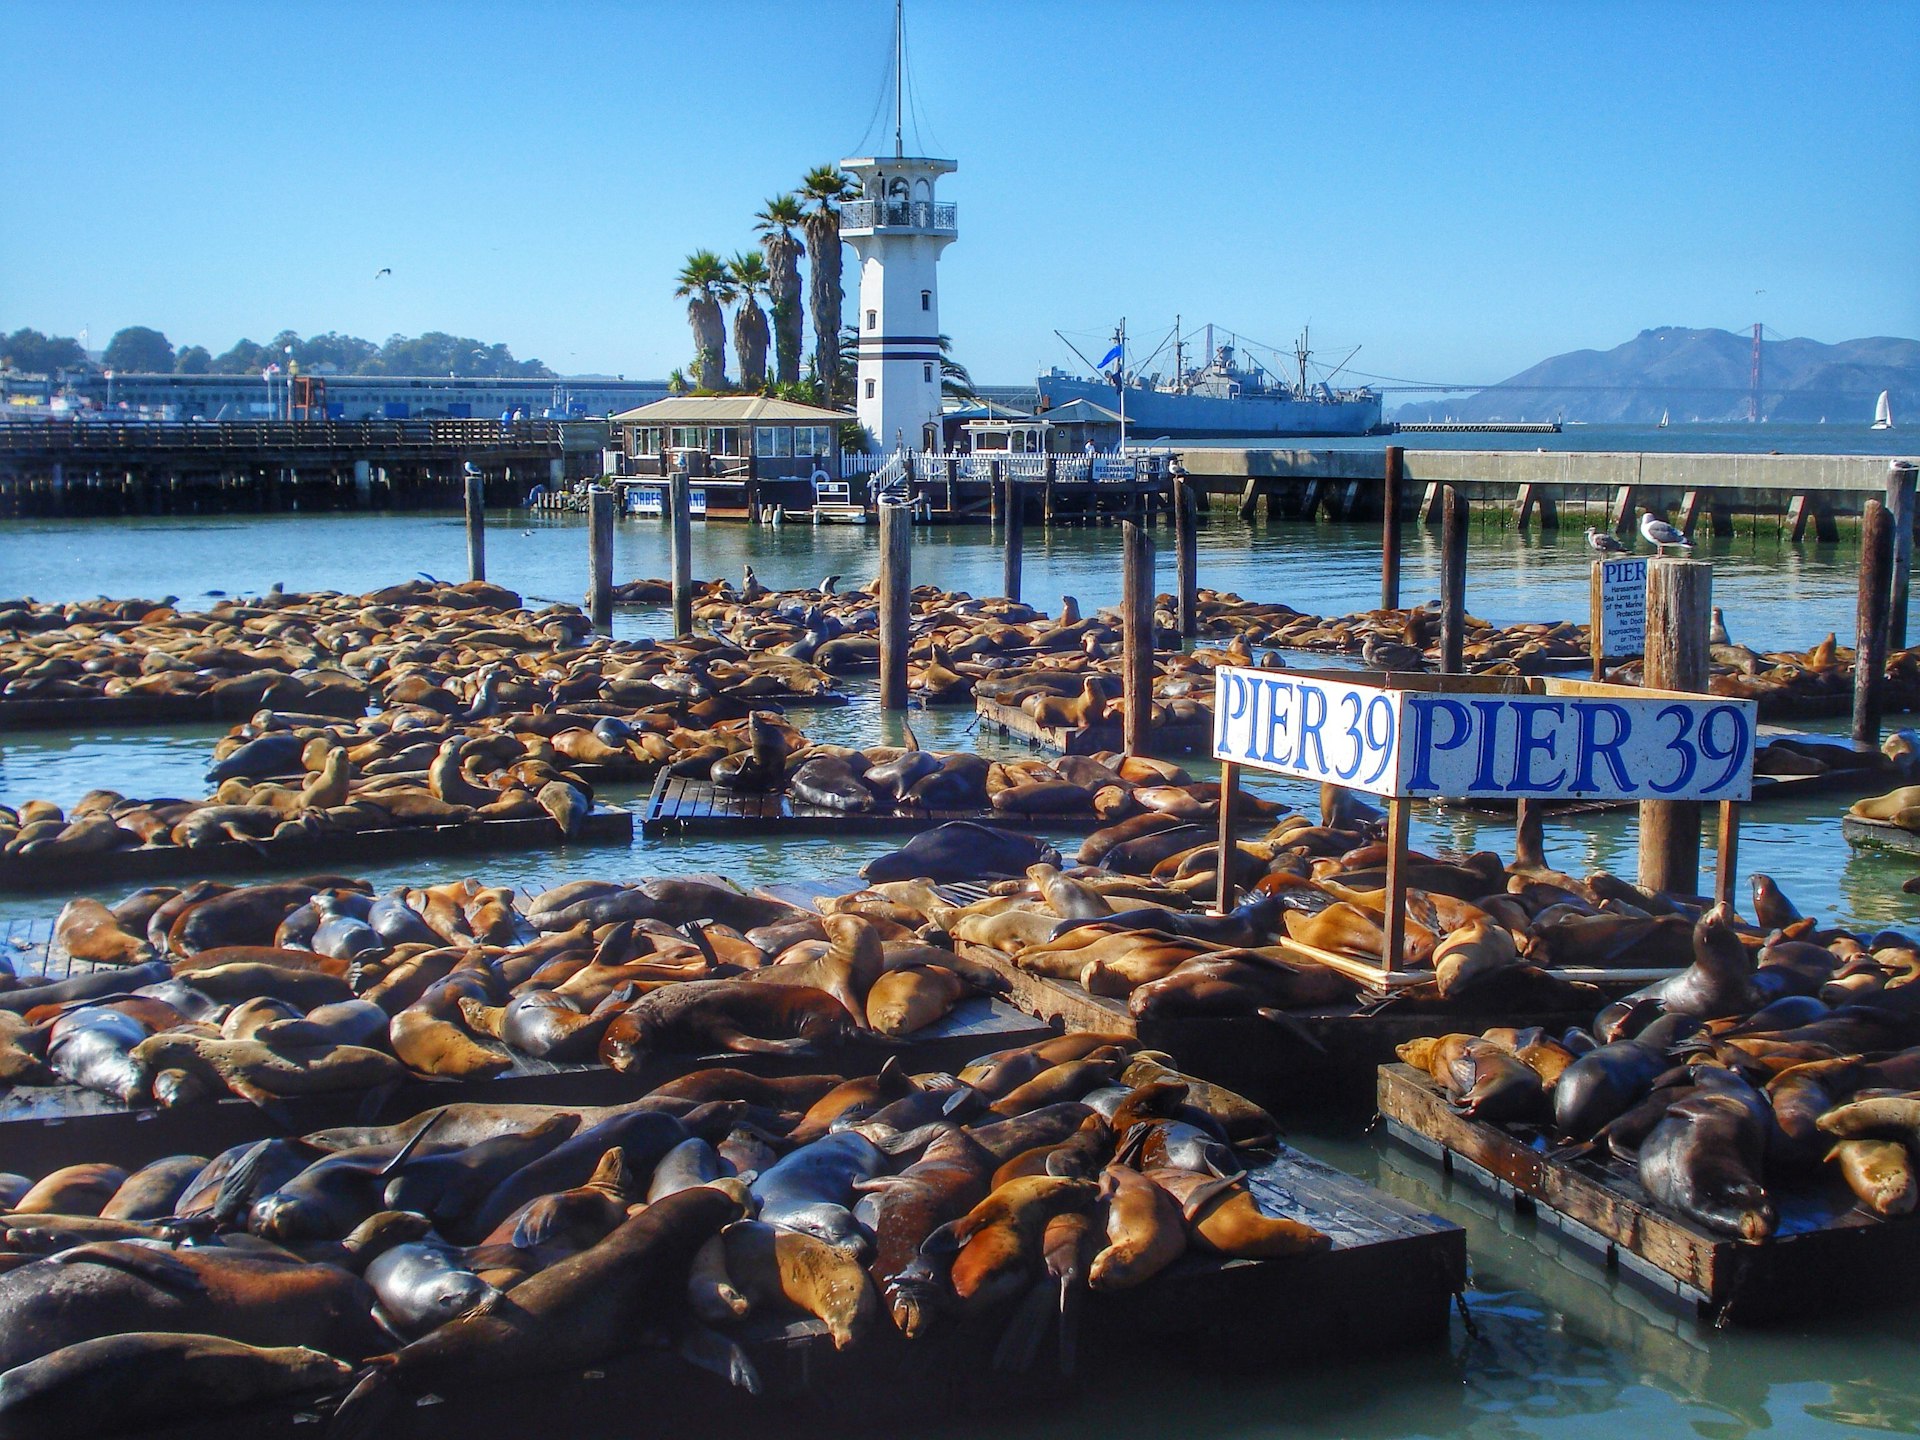 Hundreds of brown sea lions lounge in the sun on jetties under a sign that says "Pier 39"